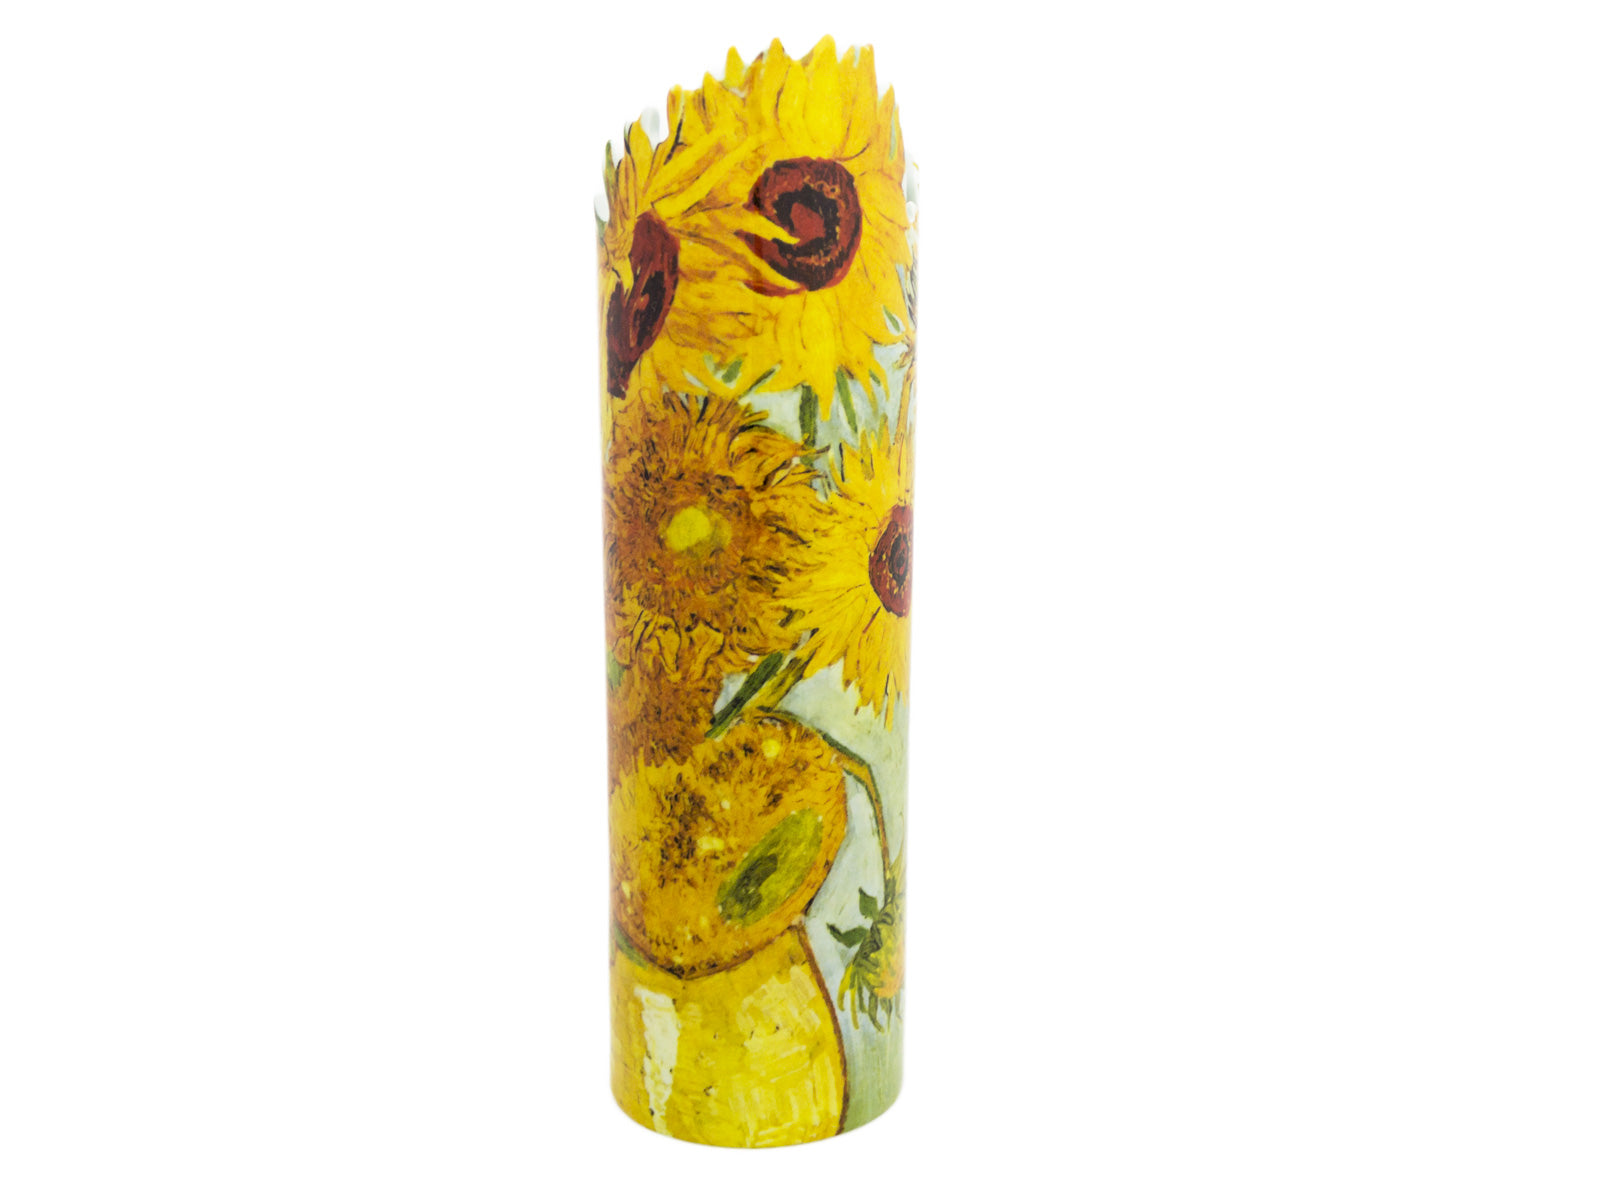 A porcelain vase with Vincent Van Gogh's iconic Sunflowers painting laid into it, with the top edge of the vase following the shape of the flowers